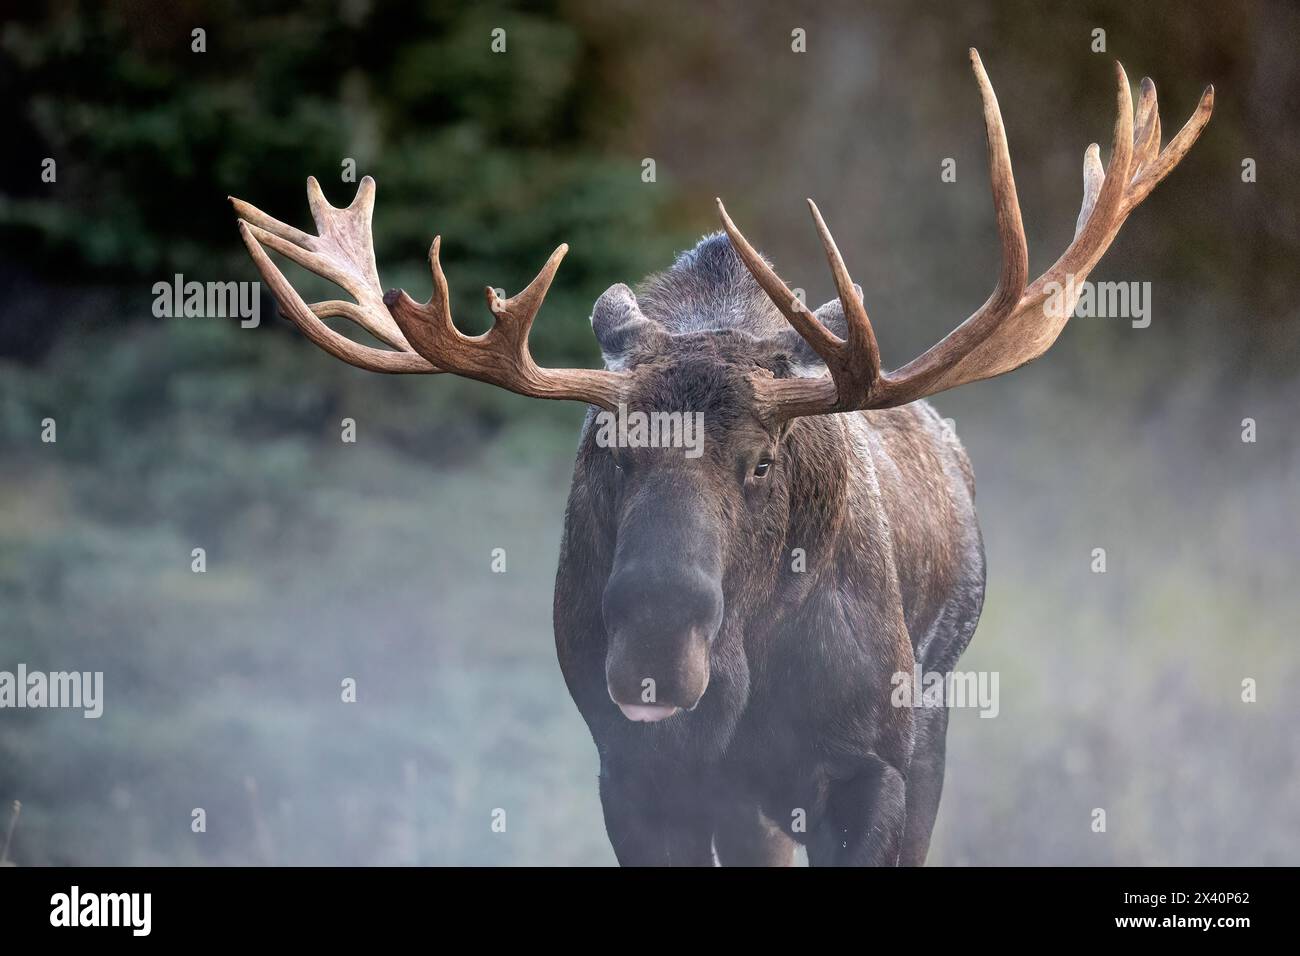 Bull moose (Alces alces) wades through the mist of a cool Southcentral Alaska evening during the September 'rut', or breeding season. Moose are the... Stock Photo